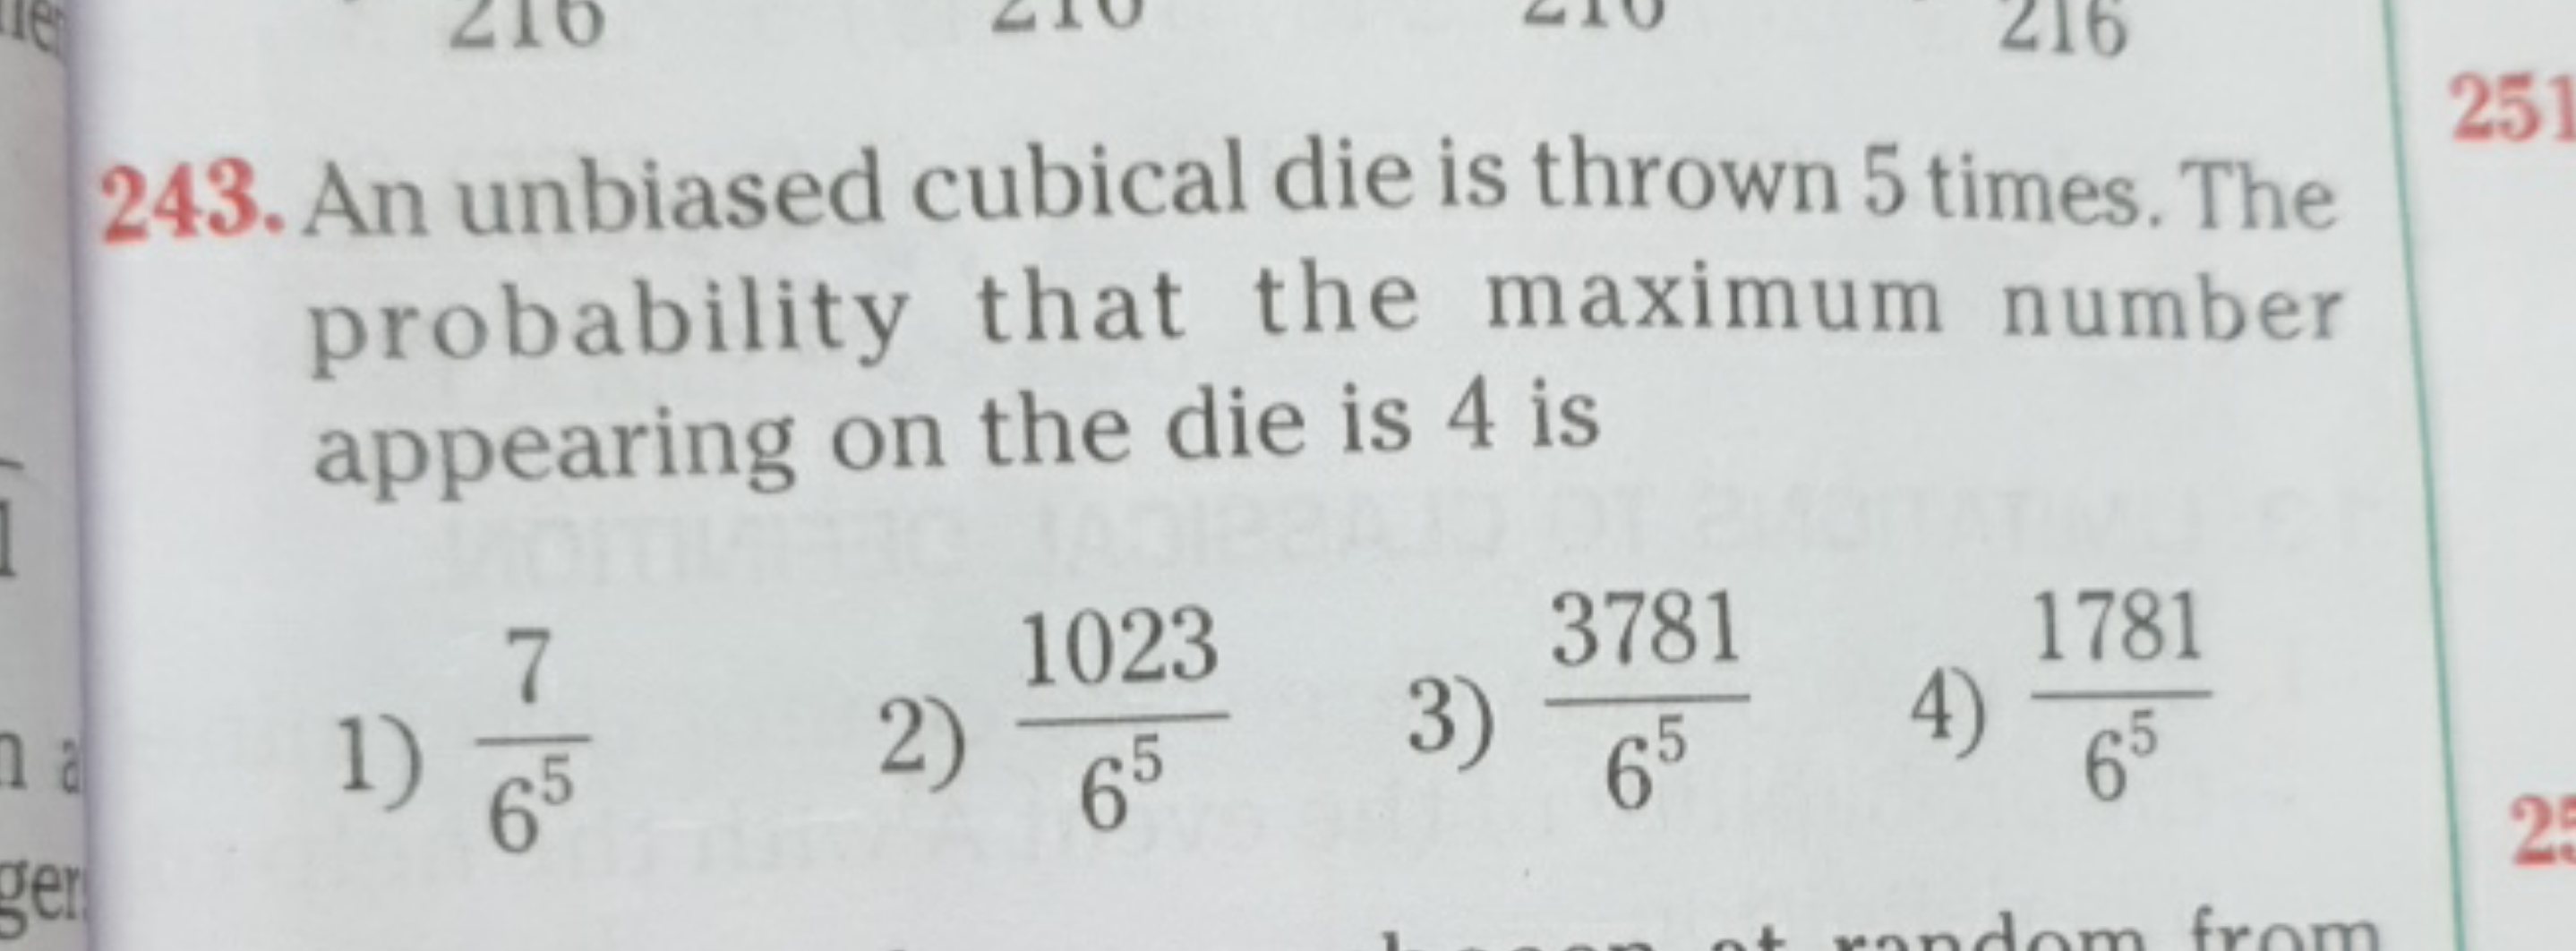 An unbiased cubical die is thrown 5 times. The probability that the ma